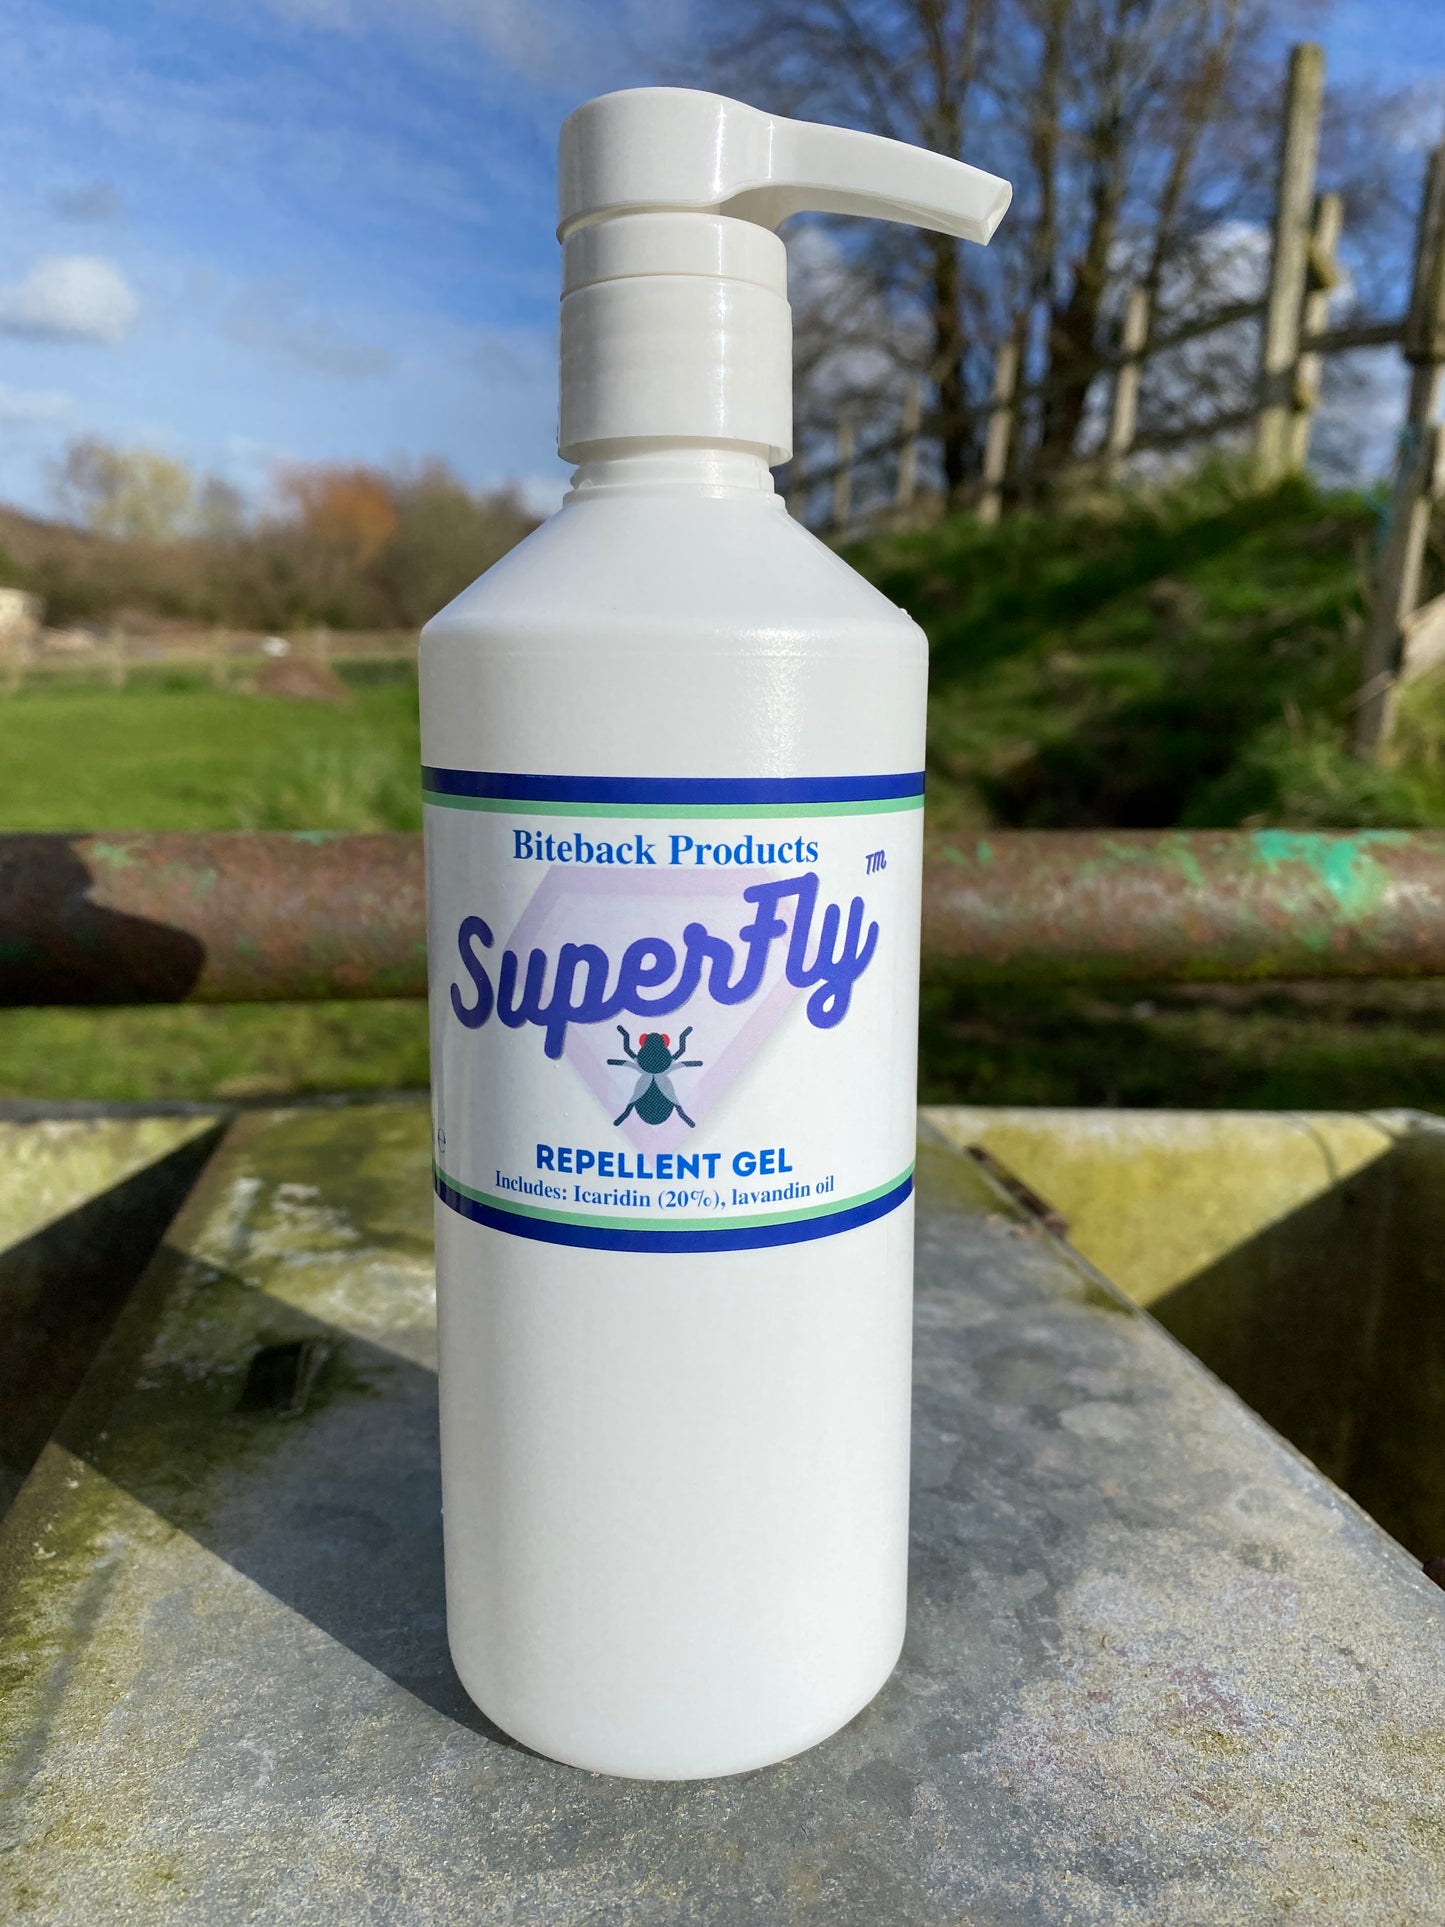 SuperFly is a crab fly and broad spectrum insect repellent for horses